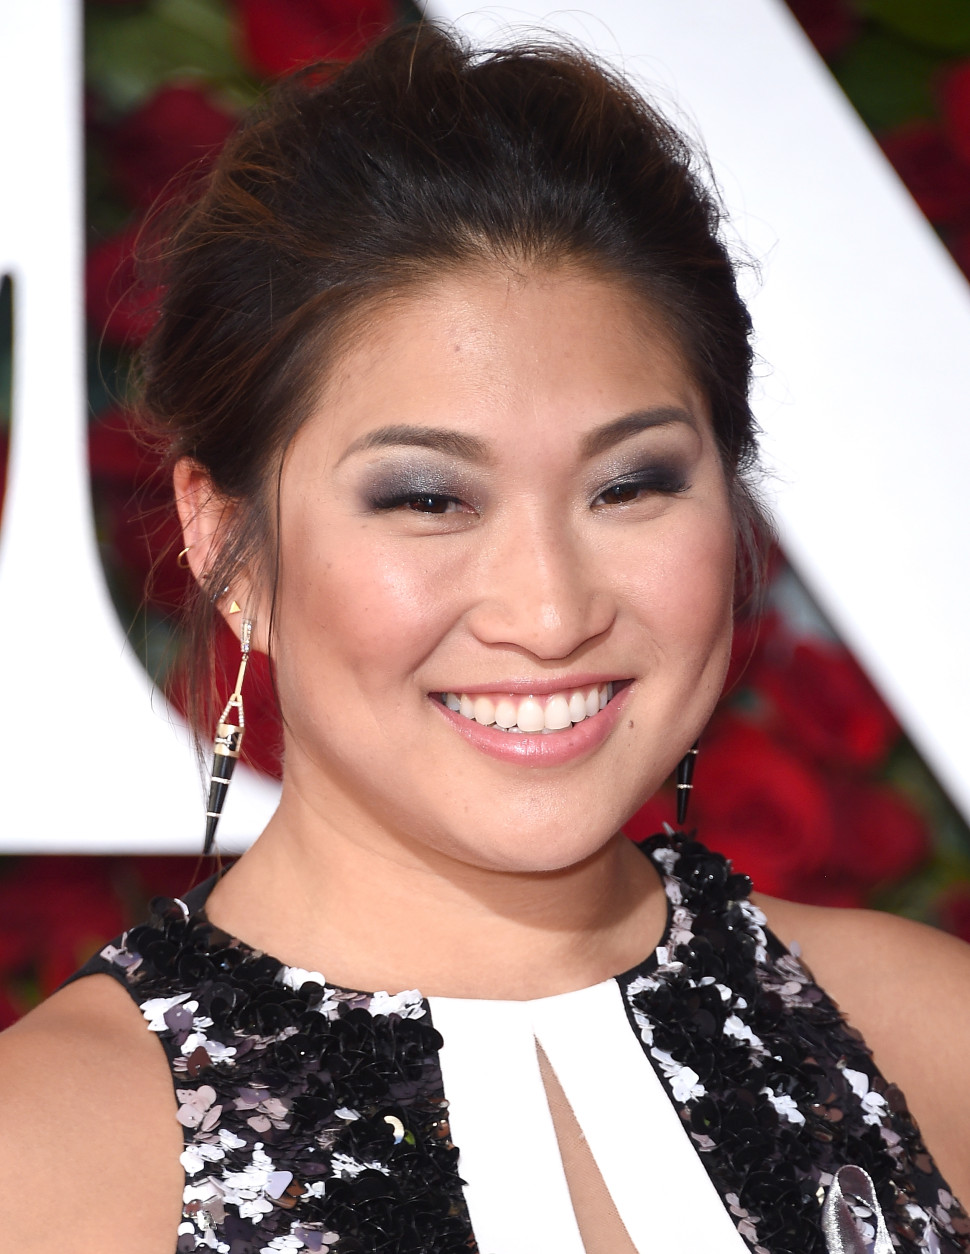 NEW YORK, NY - JUNE 12:  Actress Jenna Ushkowitz attends the 70th Annual Tony Awards at The Beacon Theatre on June 12, 2016 in New York City.  (Photo by Dimitrios Kambouris/Getty Images for Tony Awards Productions)